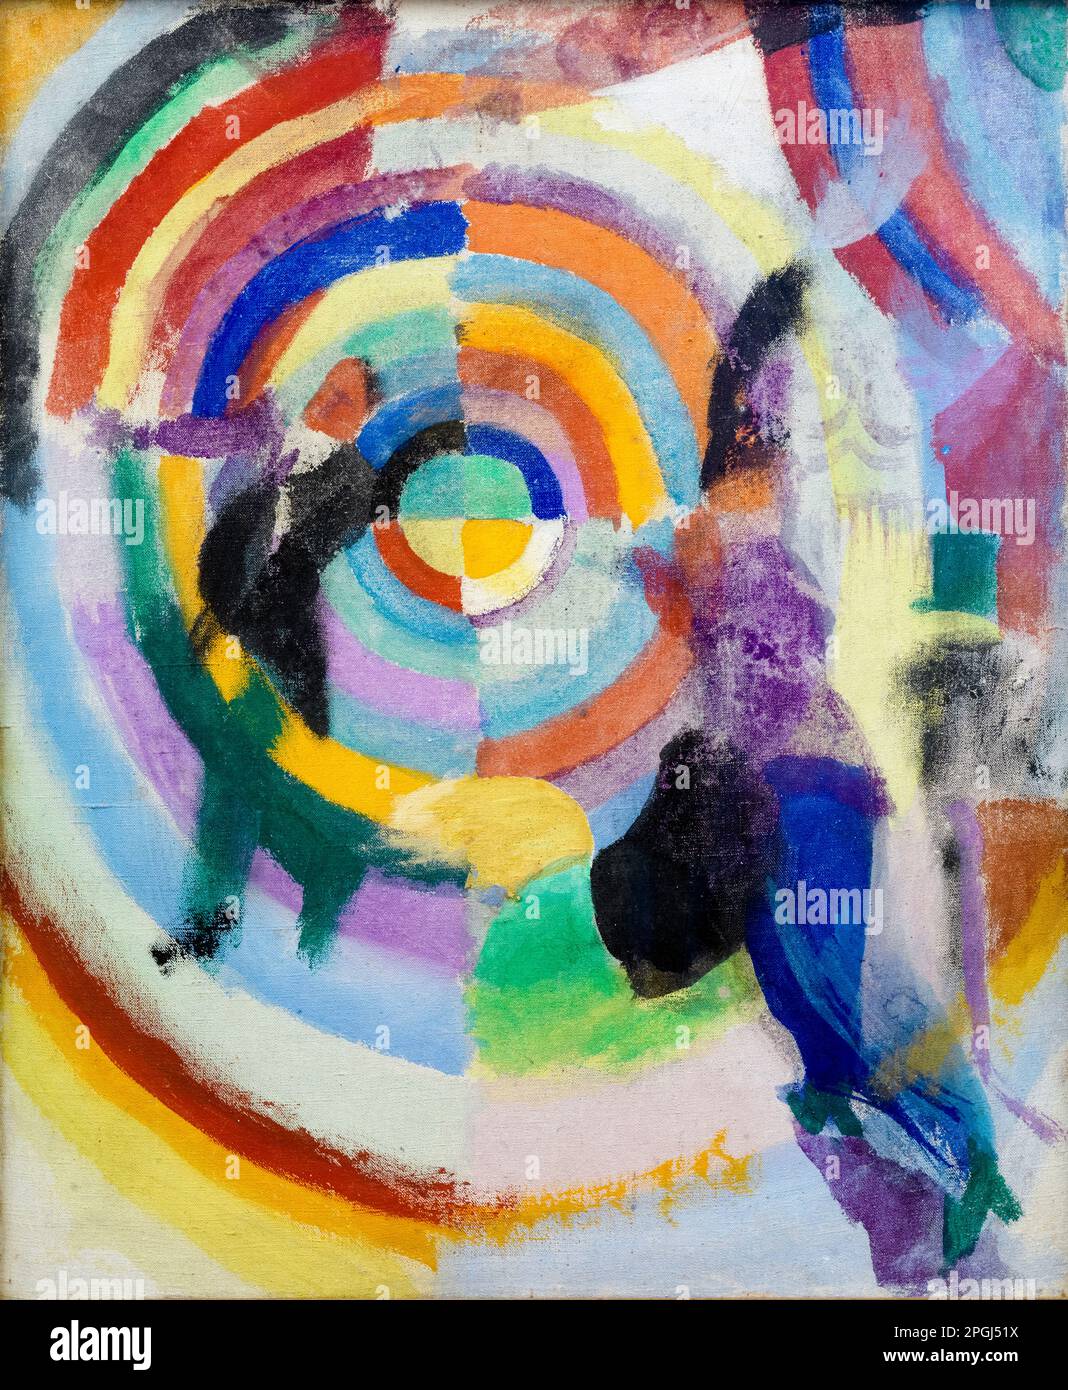 Robert Delaunay, Crimes of Passion, abstract painting in tempera on canvas, 1914 Stock Photo